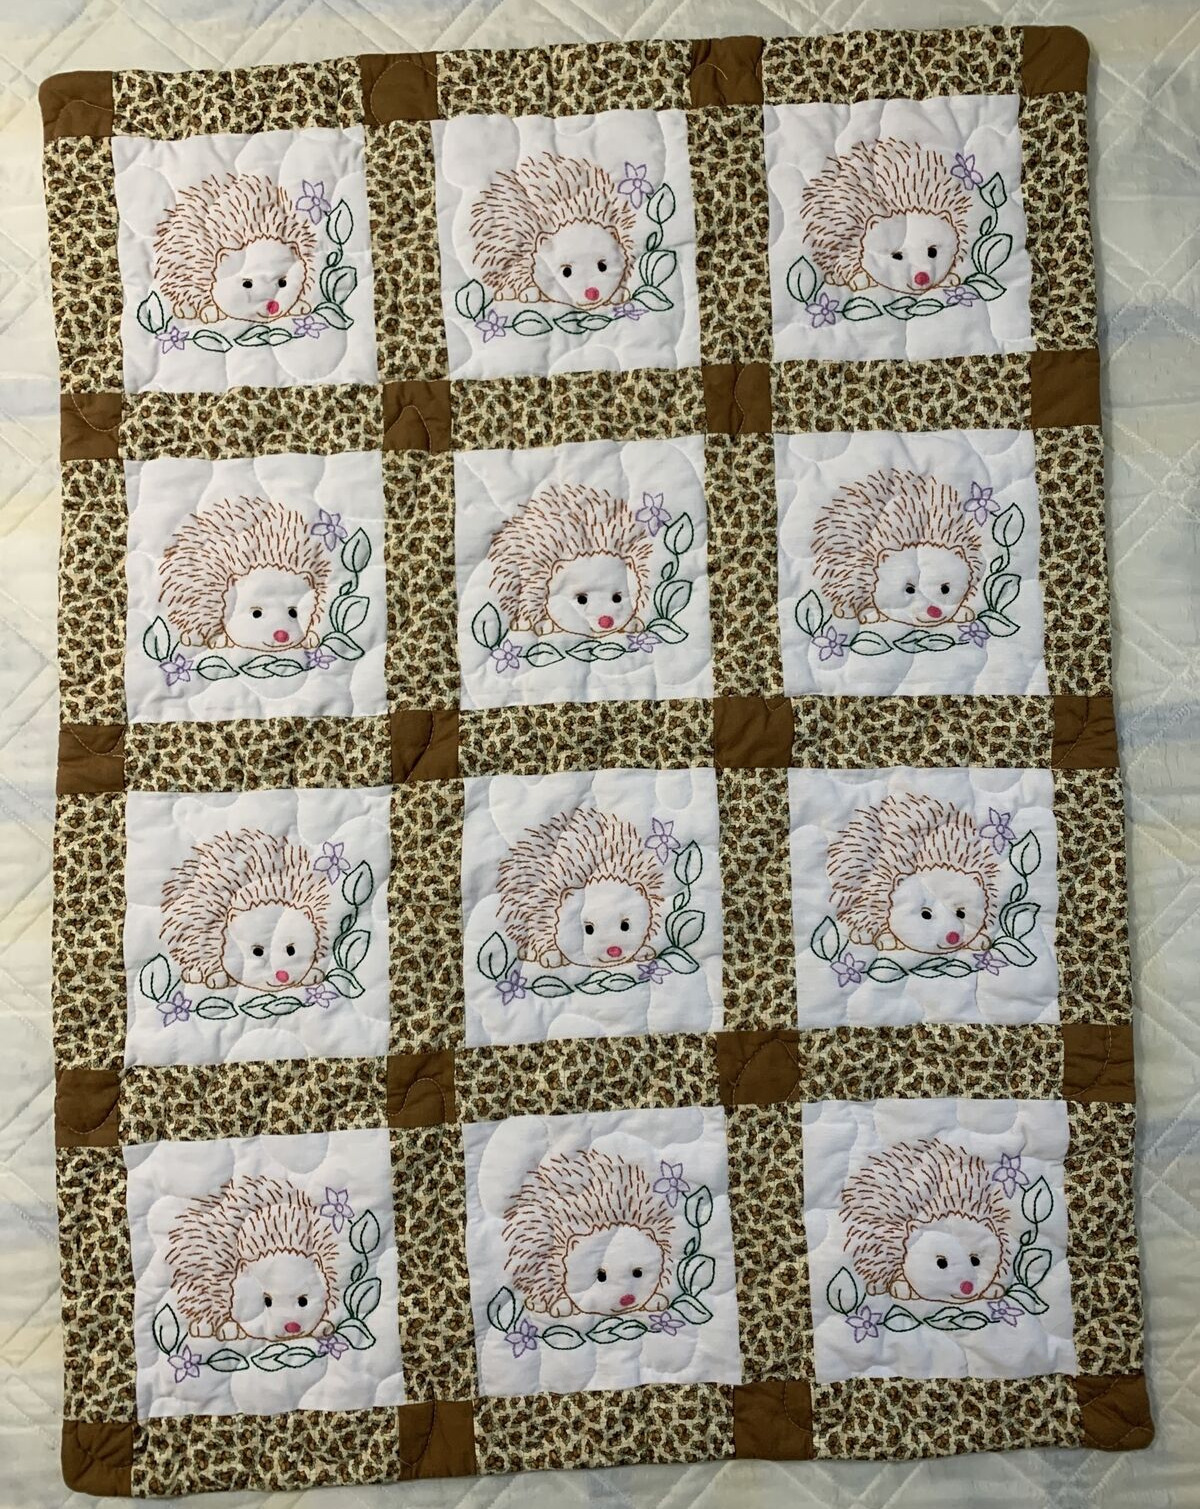 Handmade Embroidered Quilt Hedgehogs 30x40 Machine Quilted Baby/Child Decor